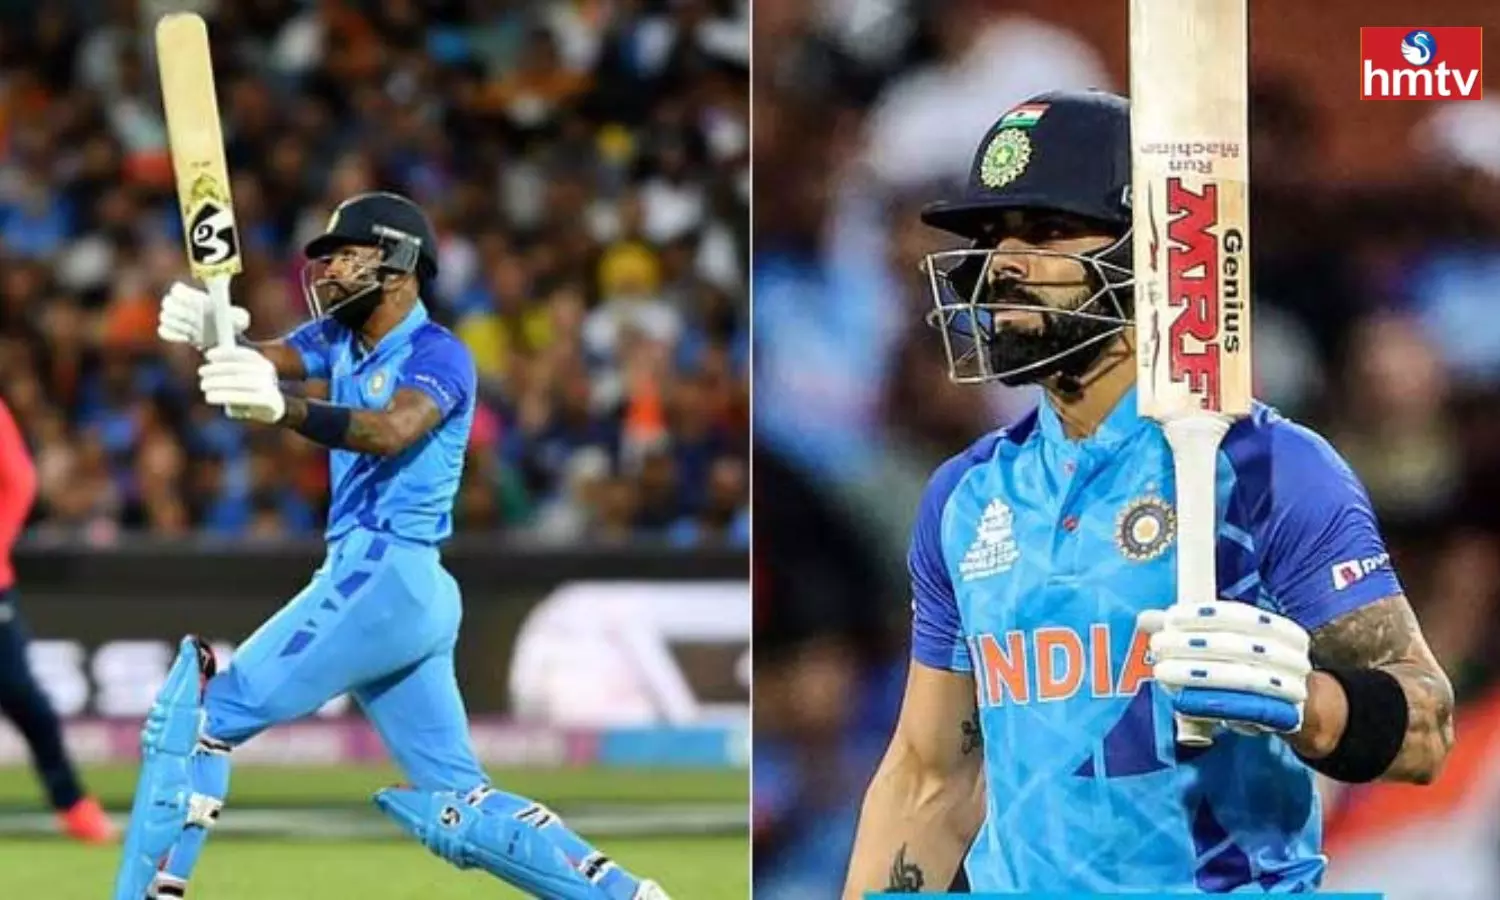 Live Score India vs England: India 168/6 in 20 Overs